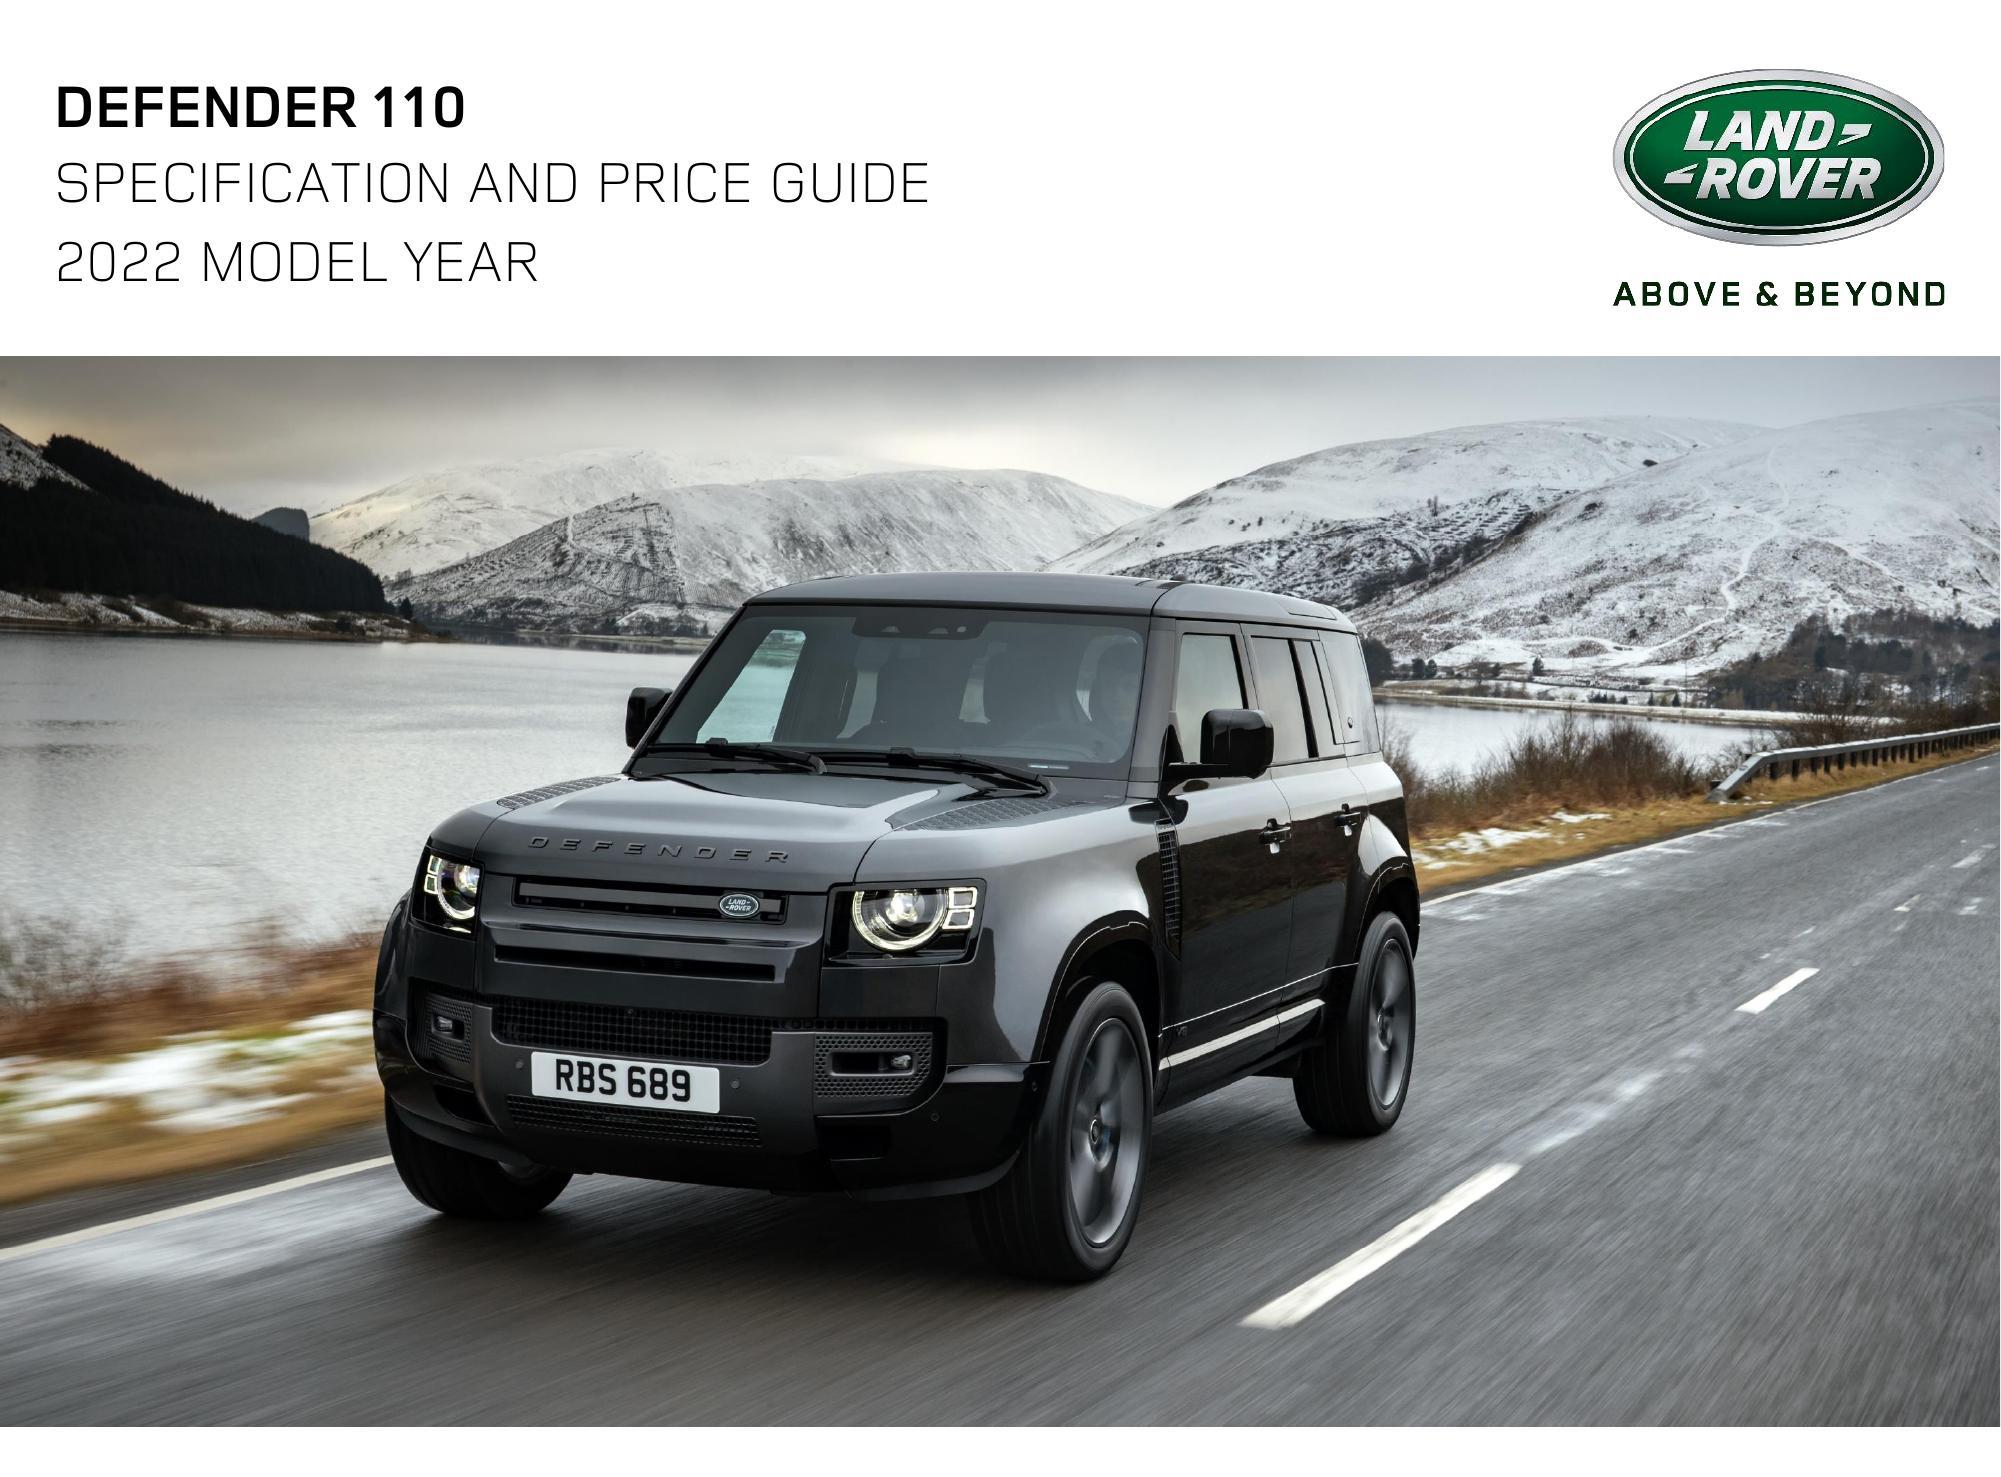 defender-110-specification-and-price-guide-2022-model-year.pdf